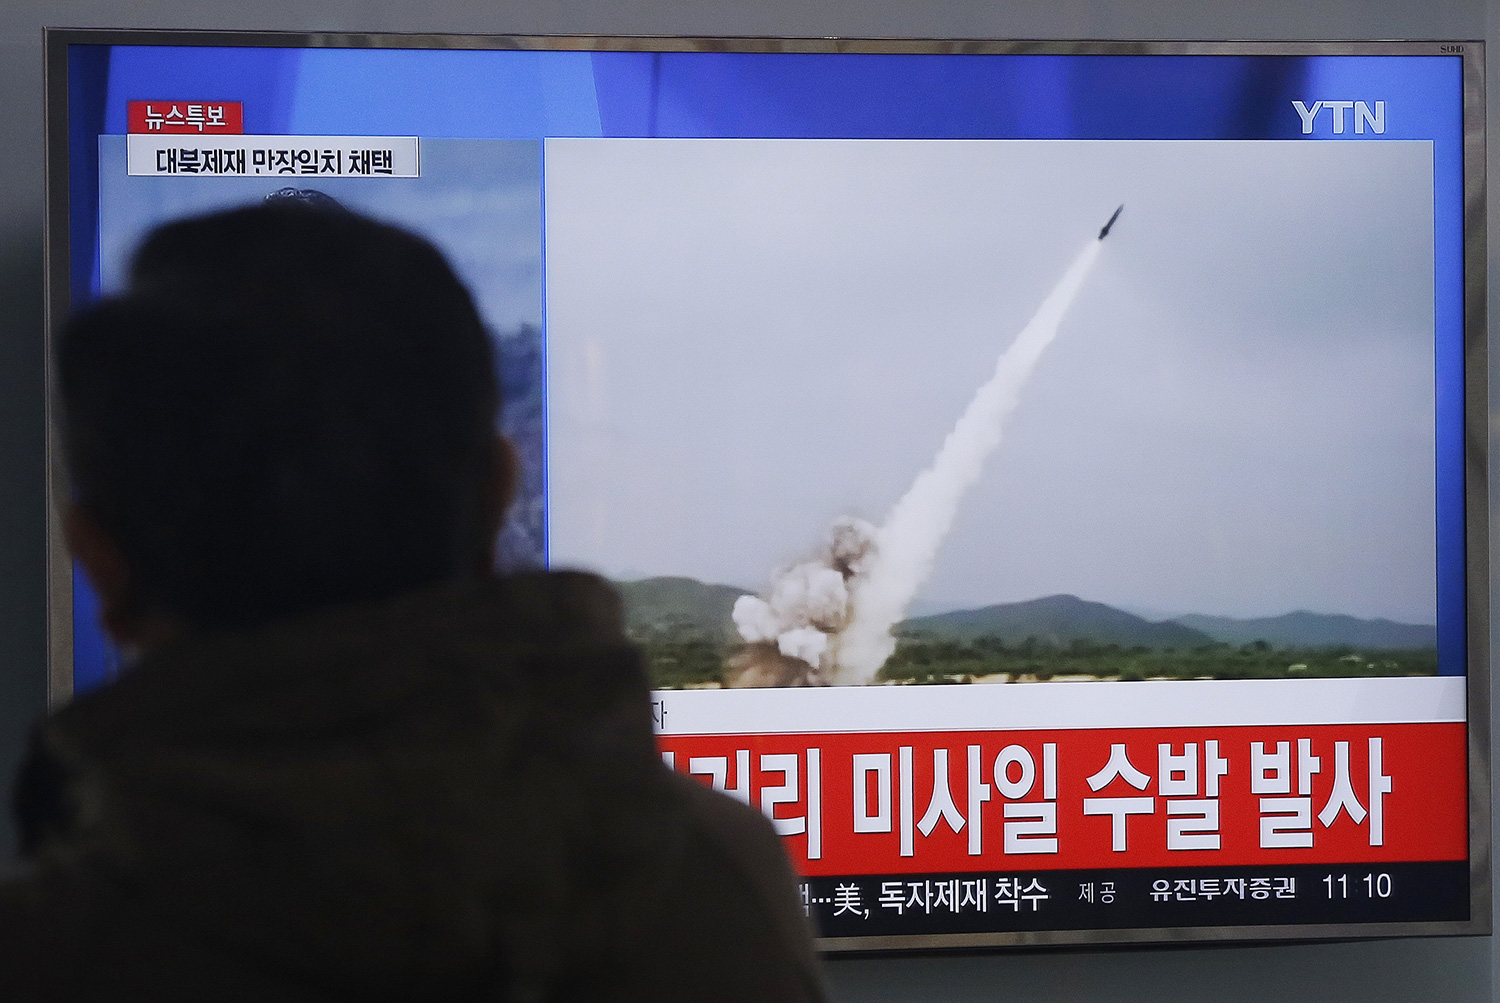 A man watches a TV news program showing a file footage of the missile launch conducted by North Korea, at Seoul Railway Station in Seoul, South Korea, Thursday, March 3, 2016. North Korea fired several short-range projectiles into the sea off its east coast Thursday, Seoul officials said, just hours after the U.N. Security Council approved the toughest sanctions on Pyongyang in two decades for its recent nuclear test and long-range rocket launch. The screen reads " North Korea launched missiles." Picture by Ahn Young-joon | AP